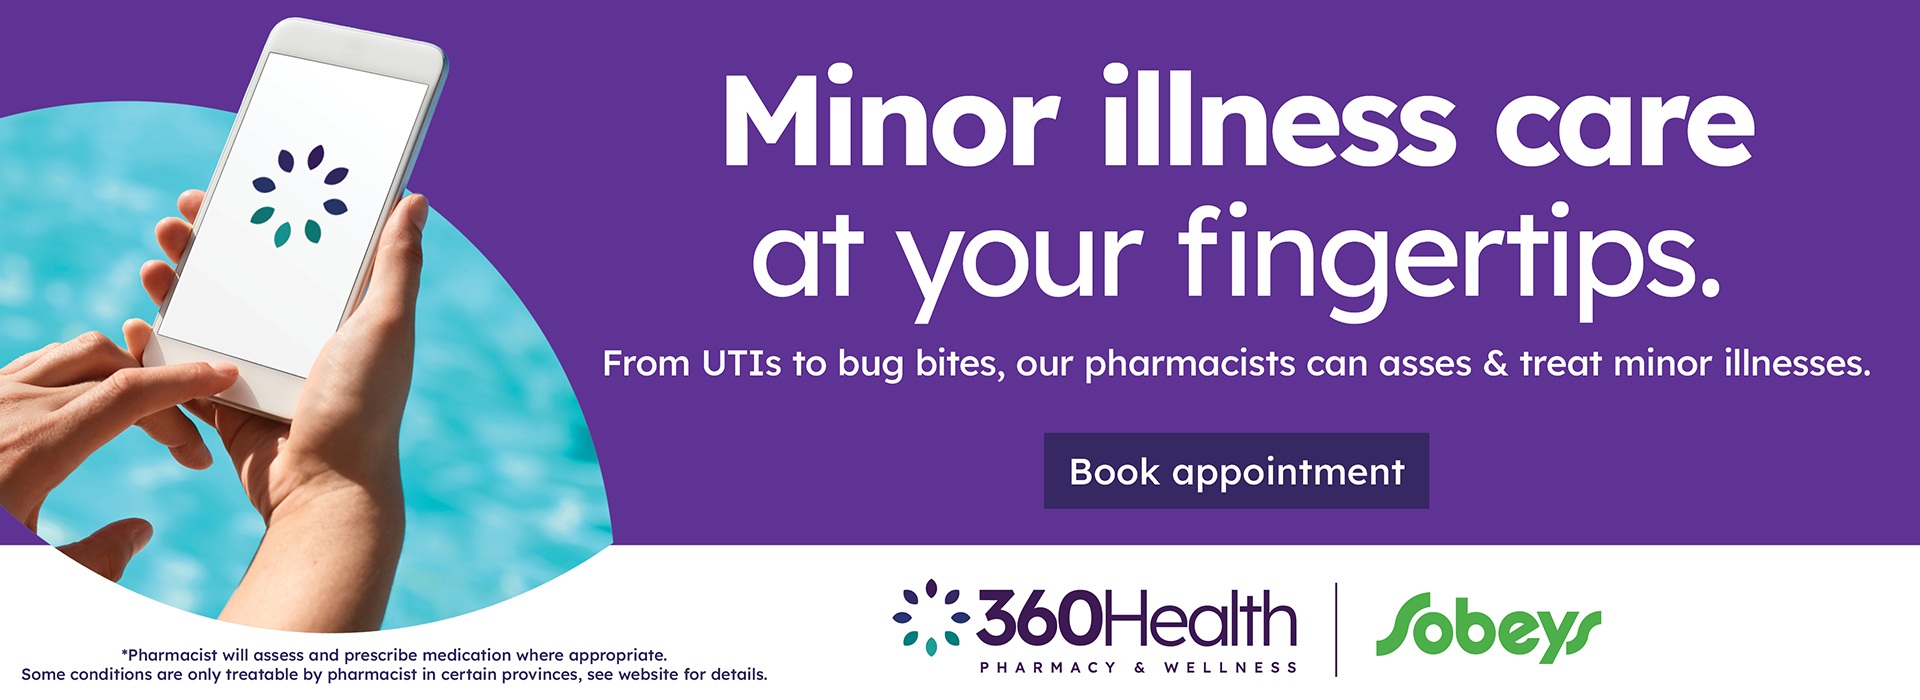 Minor illness care at your fingertips